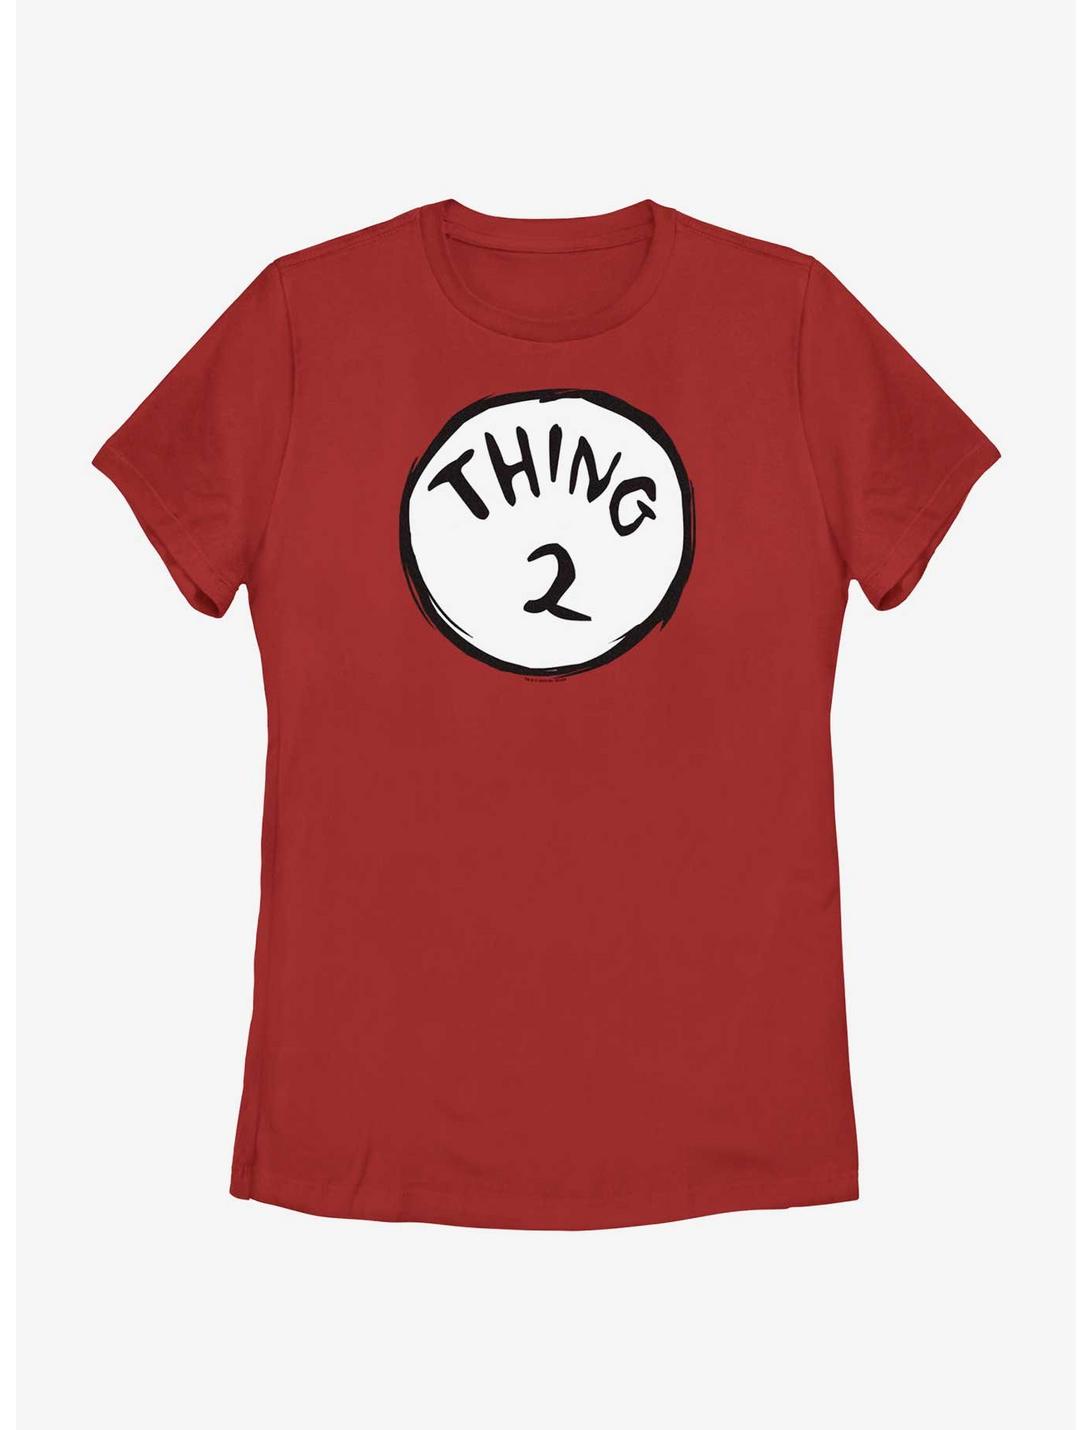 Dr. Seuss's Cat In The Hat Thing 2 Womens T-Shirt, RED, hi-res